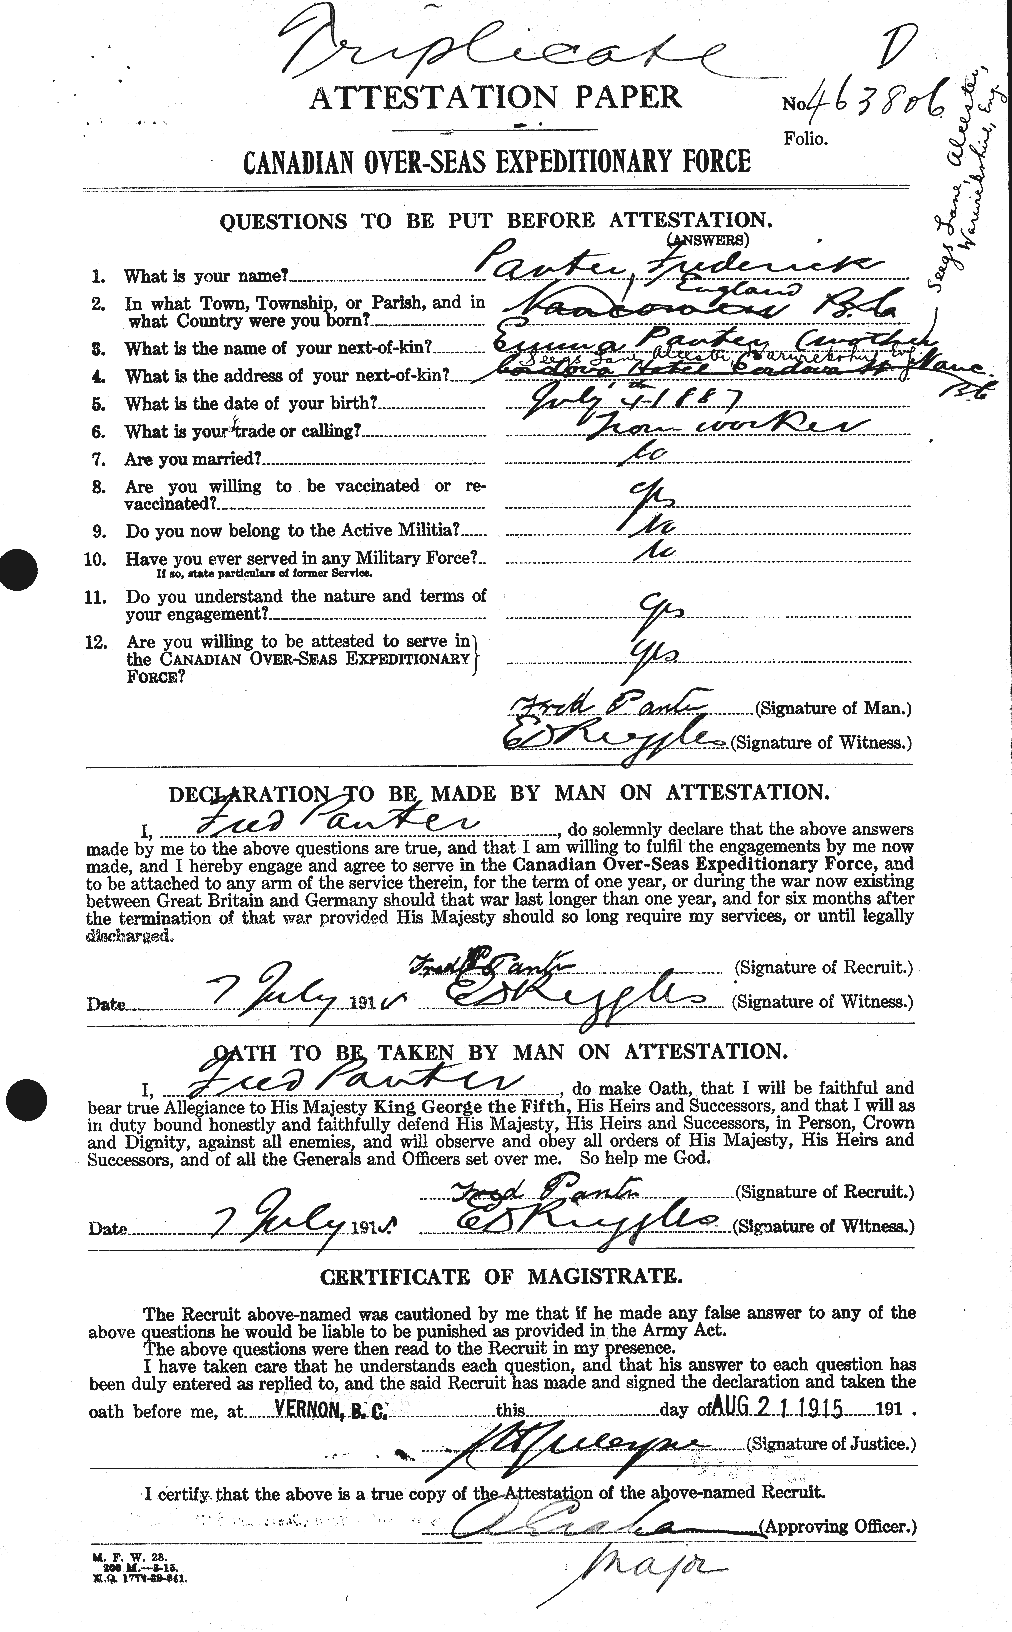 Personnel Records of the First World War - CEF 563428a